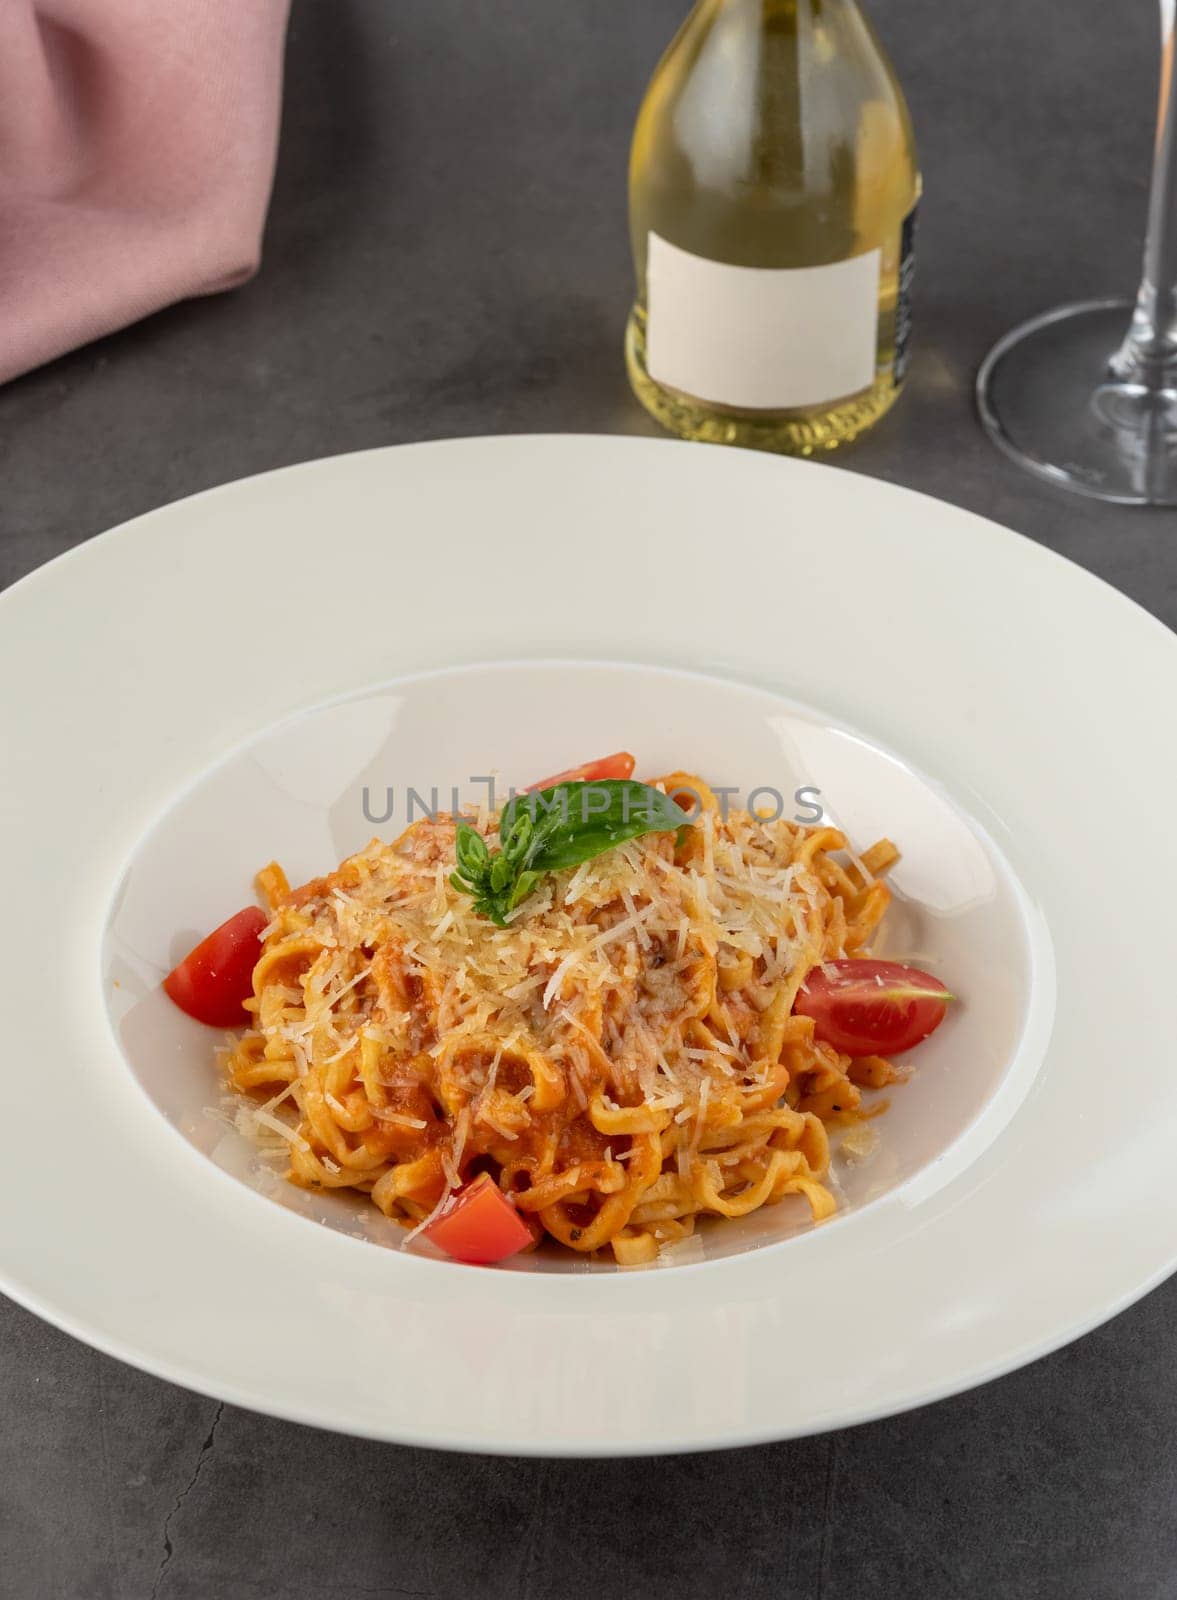 Spaghetti with Marinara sauce served in a fine dining restaurant